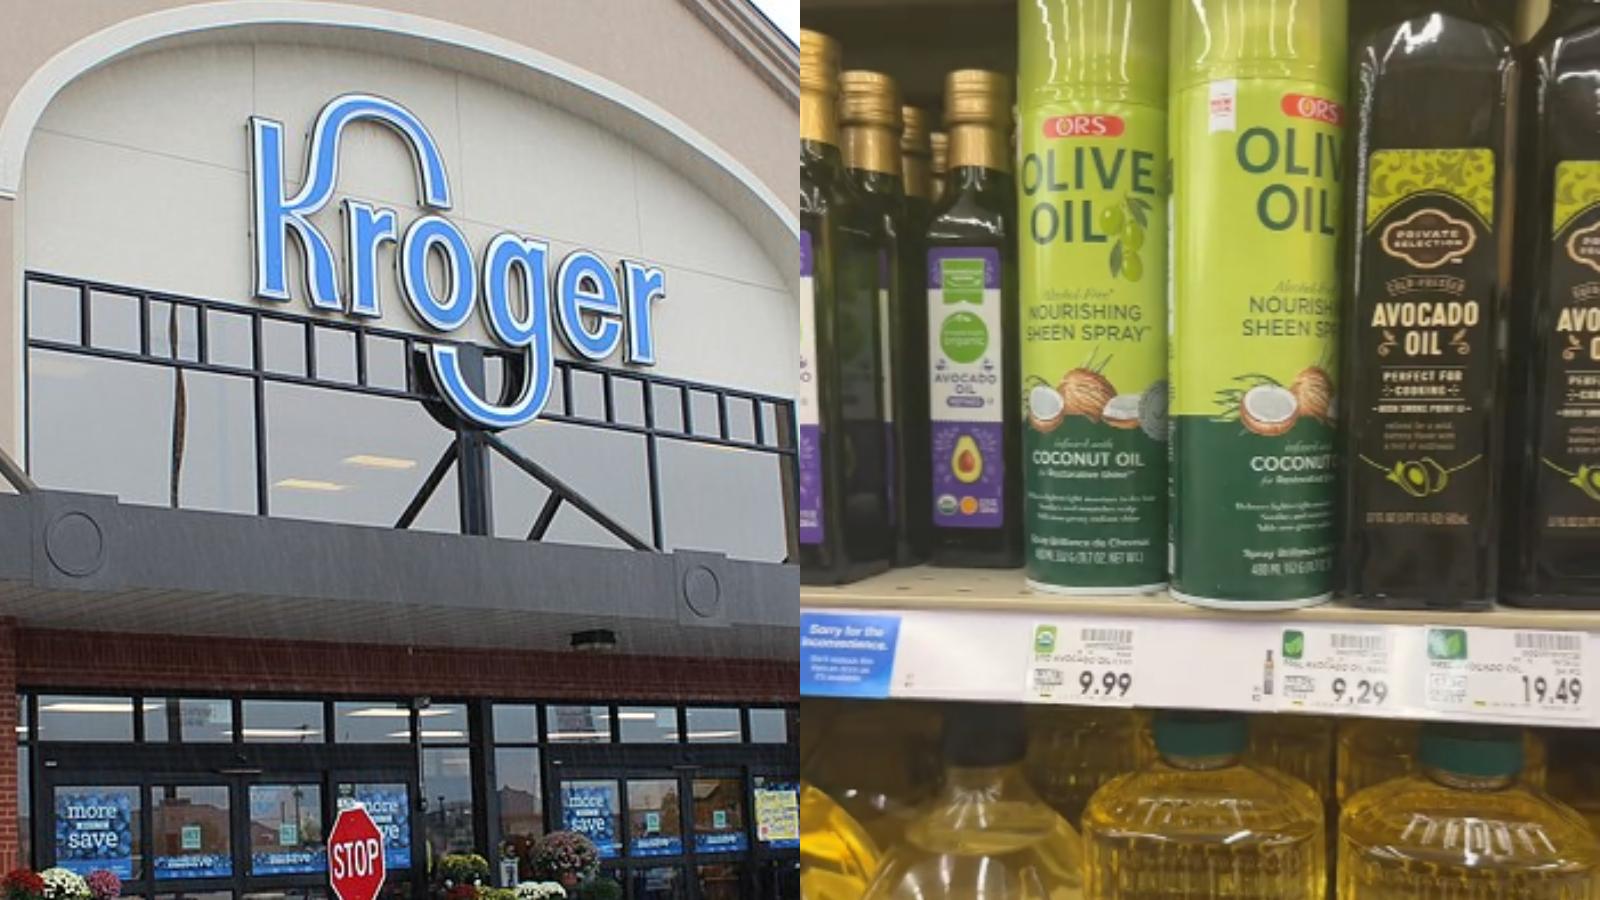 kroger stocking hairspray with cooking oil